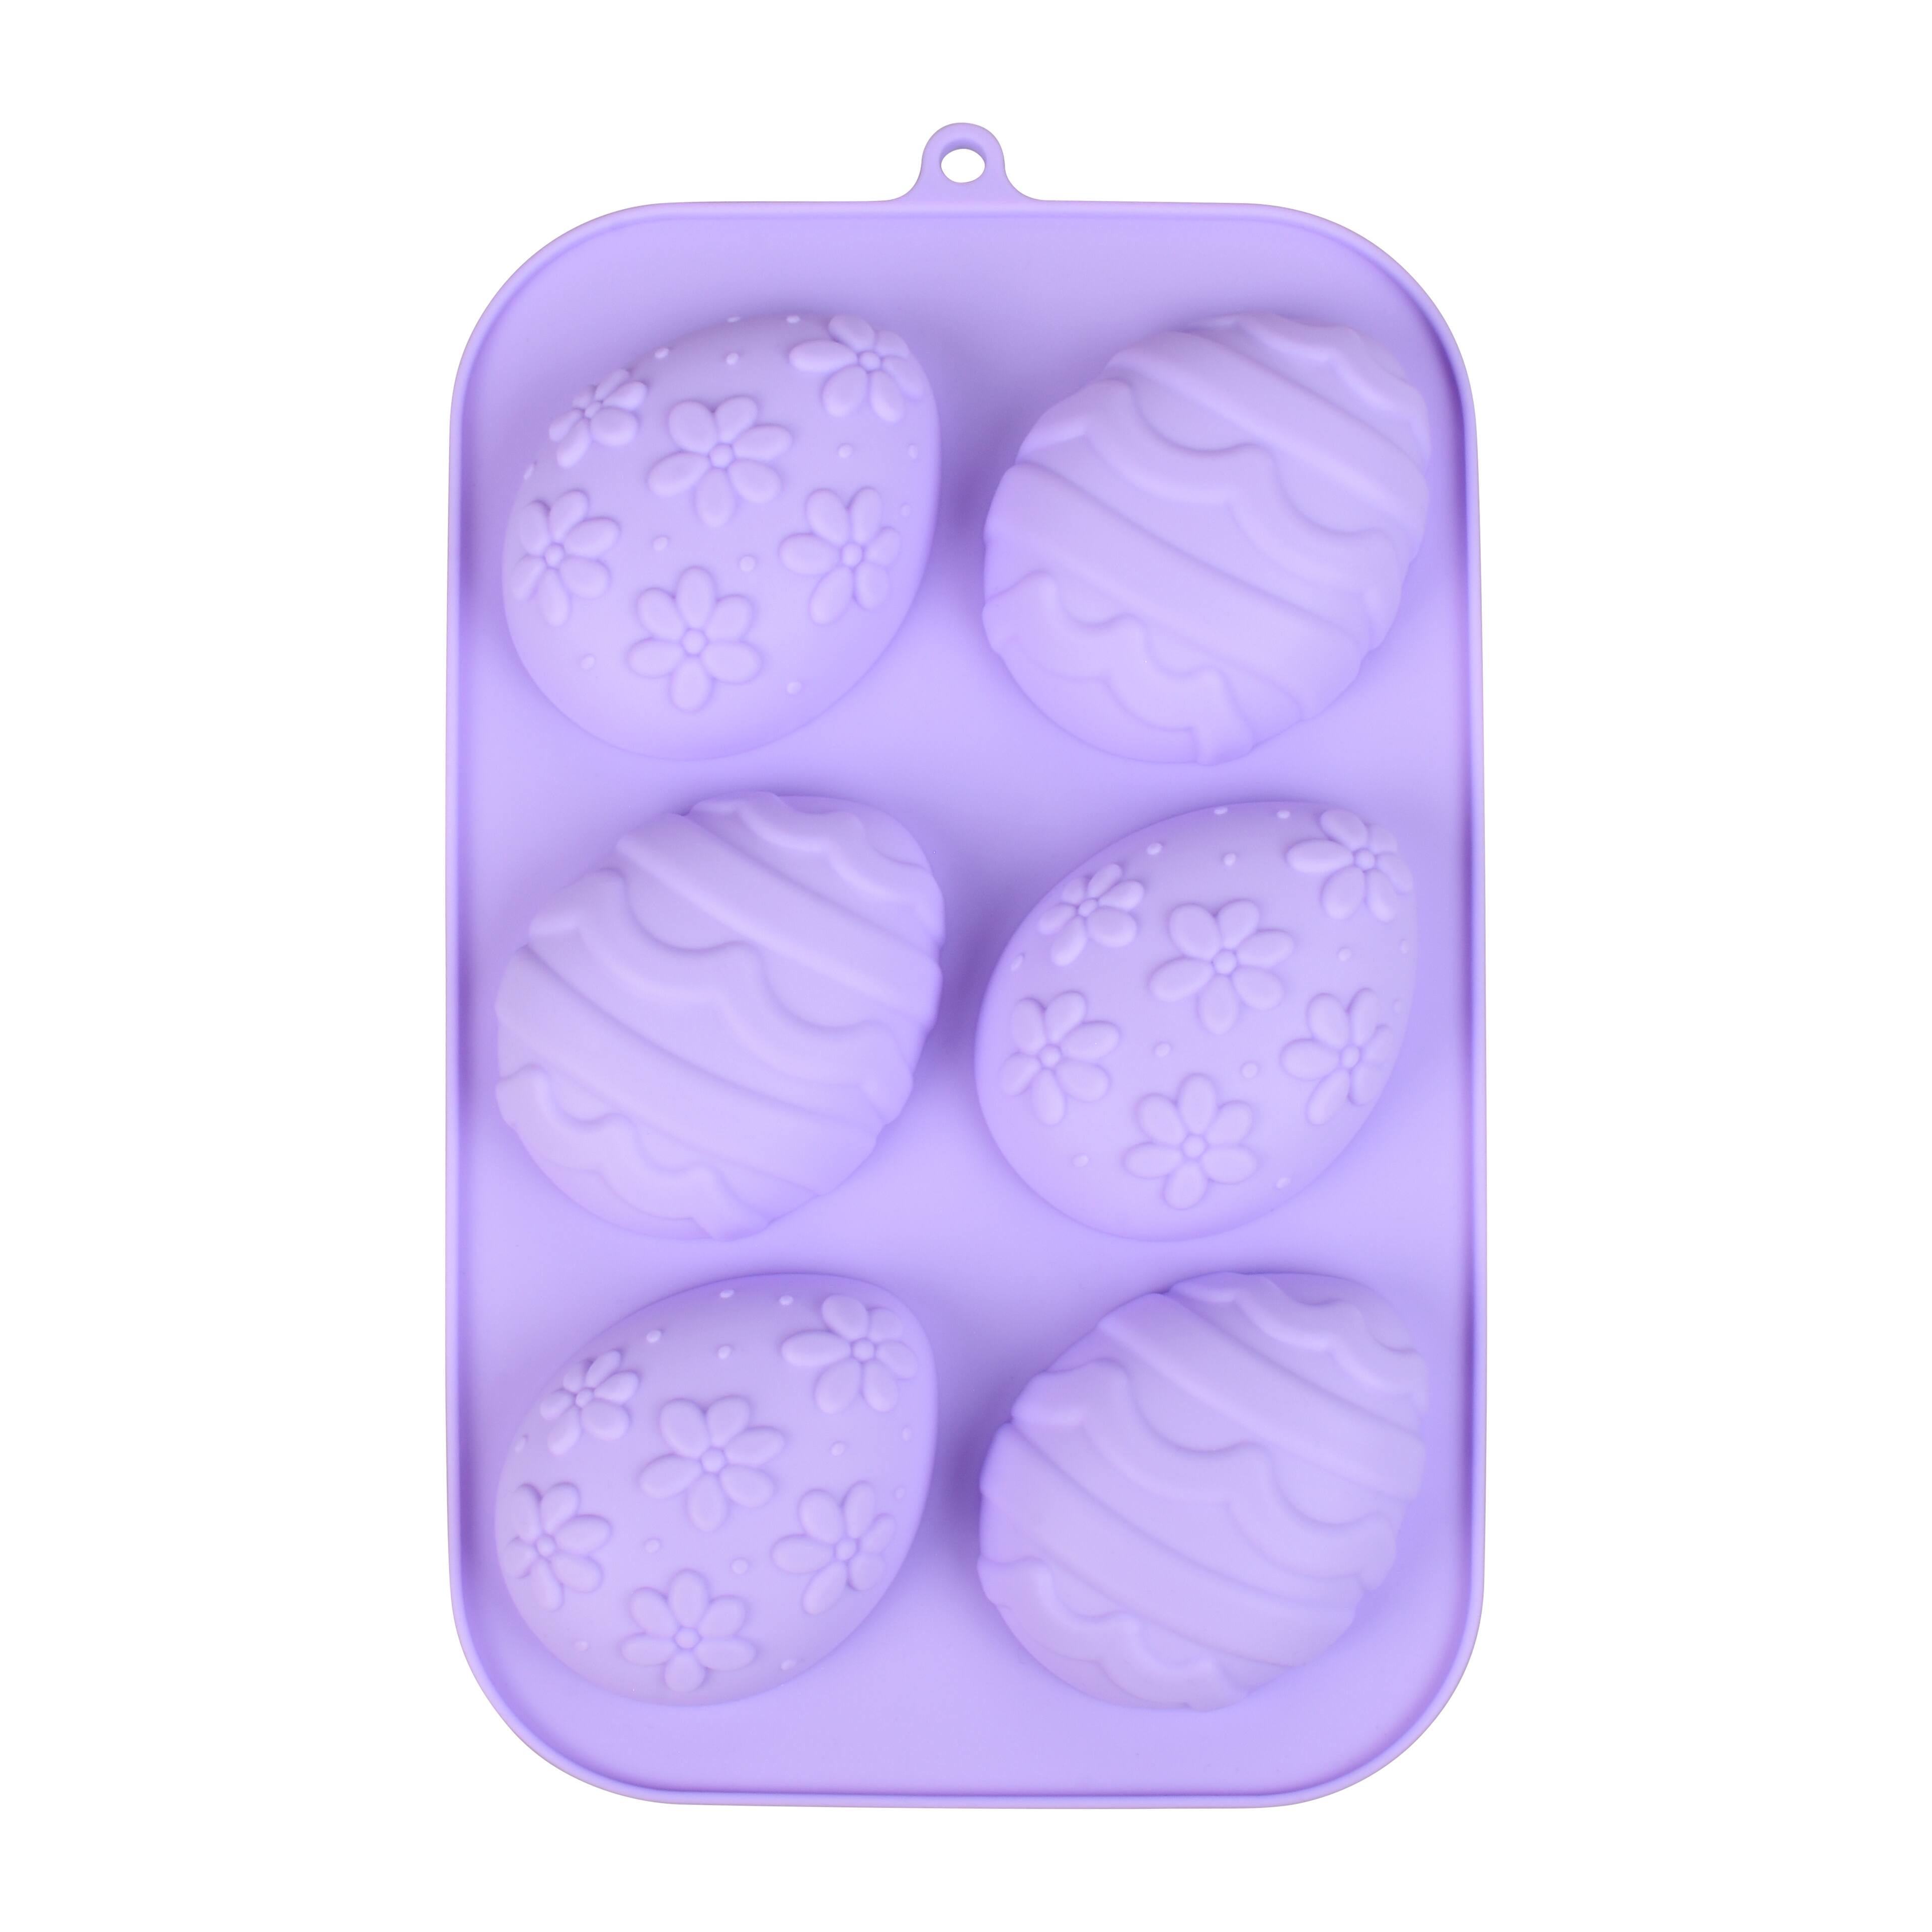 Easter Egg Shape Silicone Mold - Set of 2 – Frans Cake and Candy